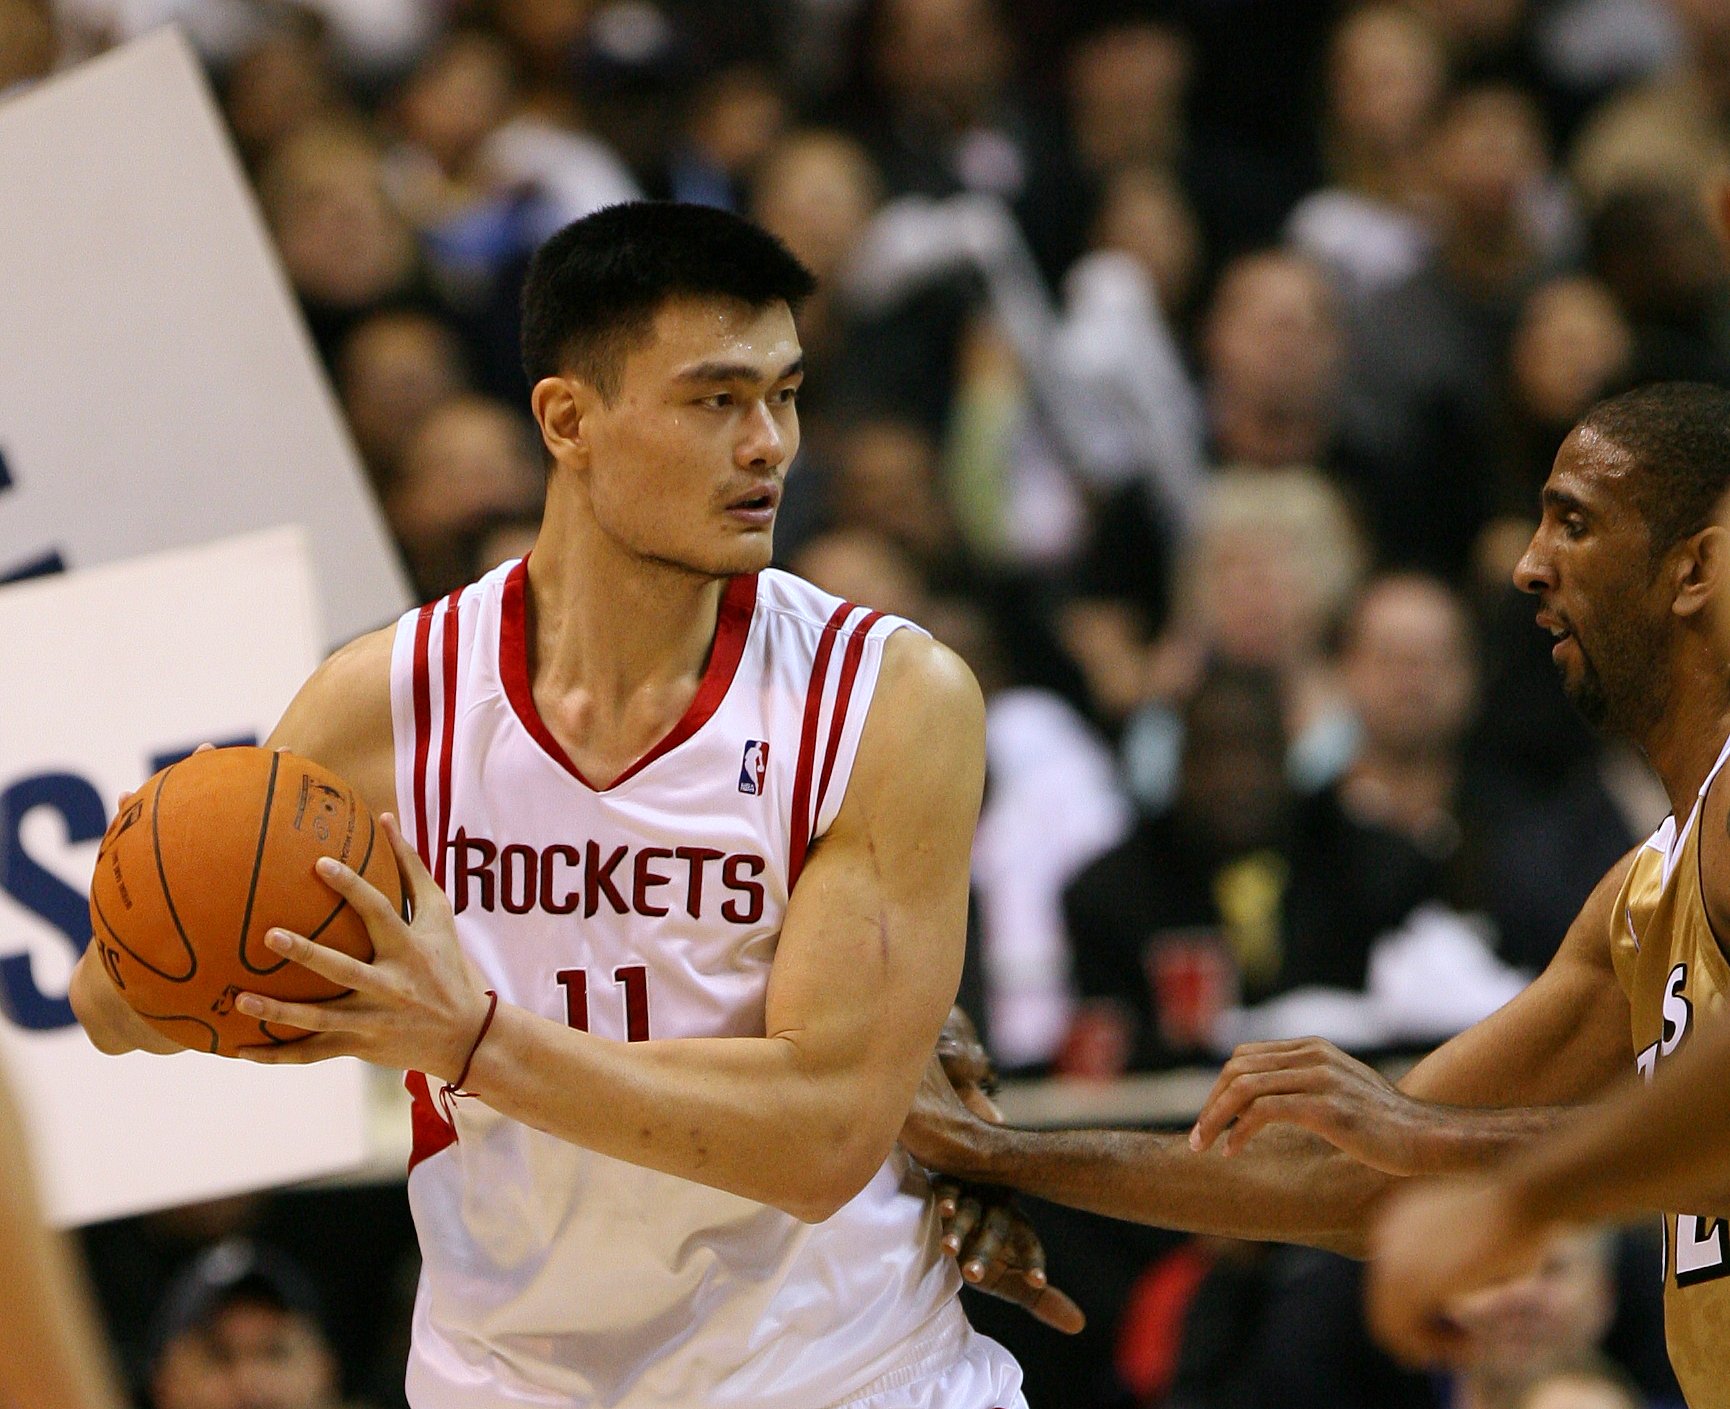 How many All-Star Games Yao Ming would have made under the new